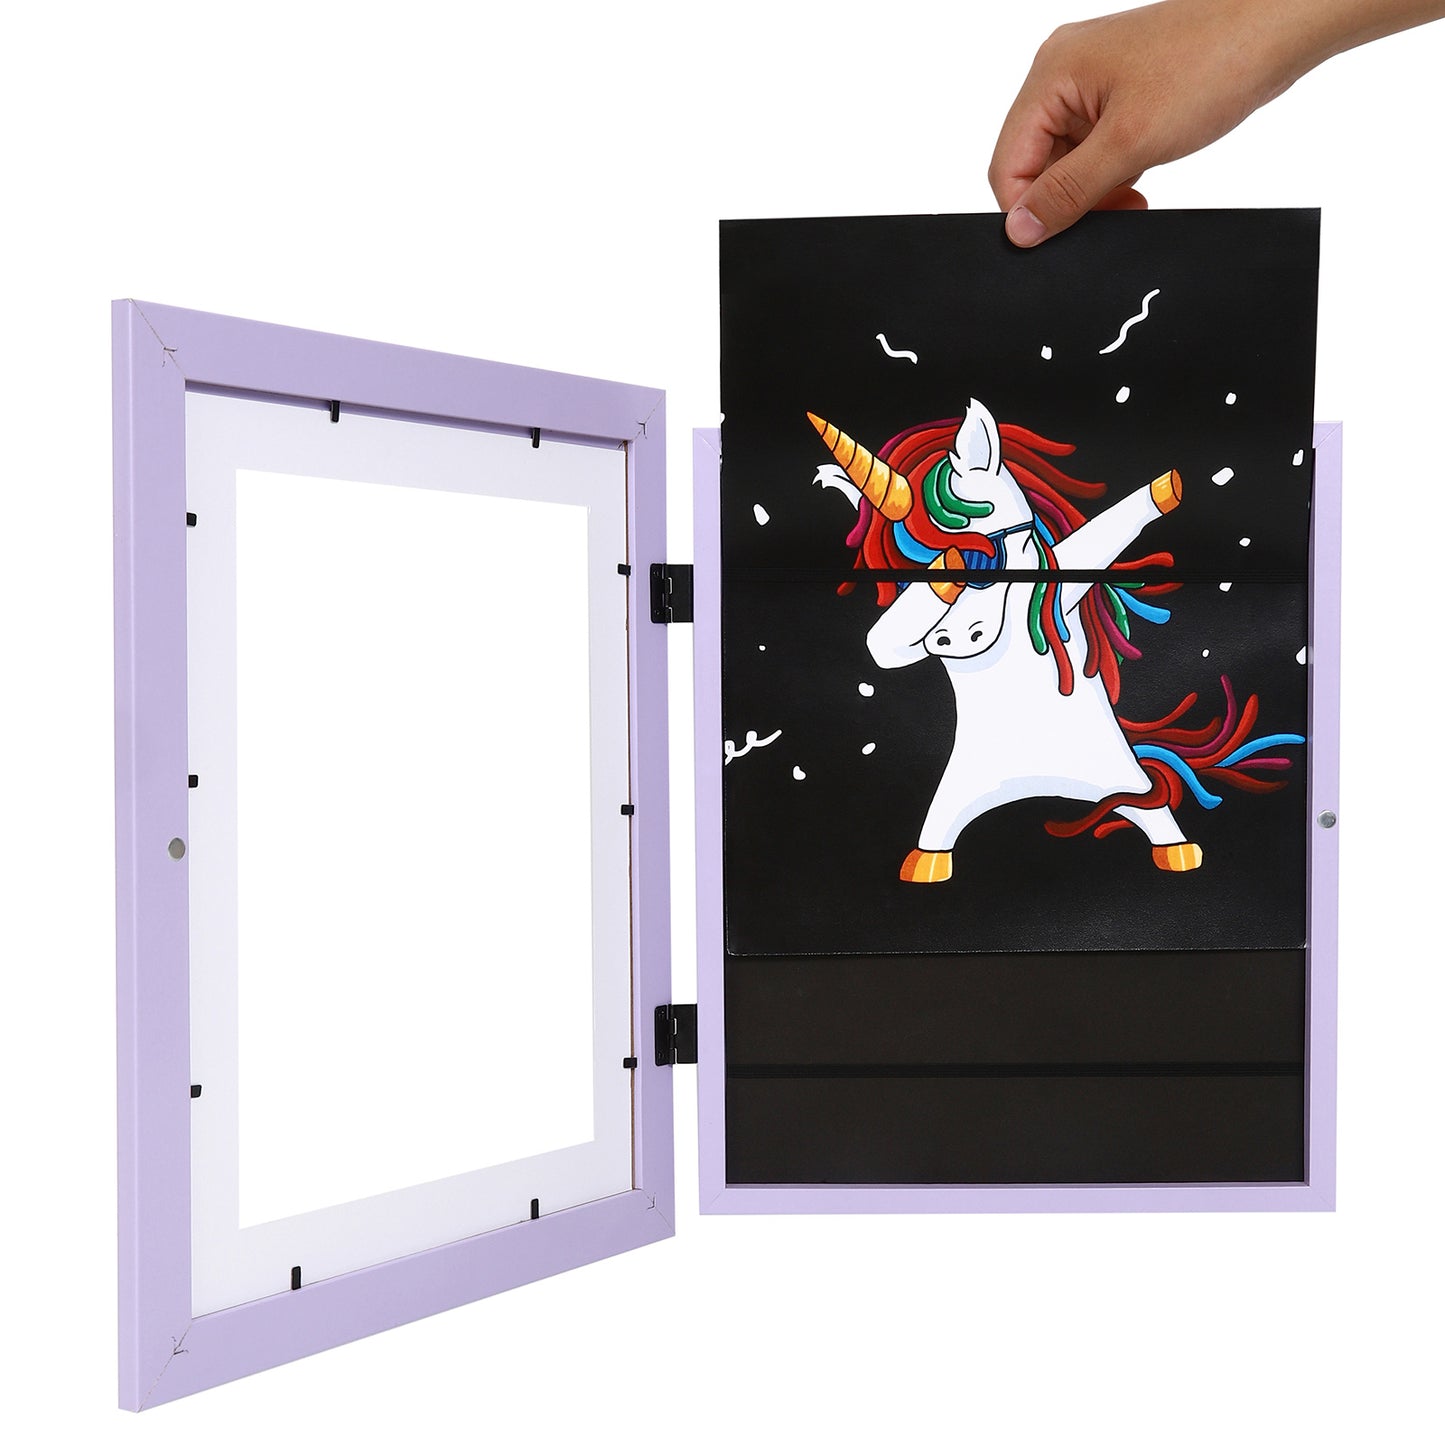 10" x 12.5" Lavender MDF Wood Kids Art Picture Frame with Elastic Straps